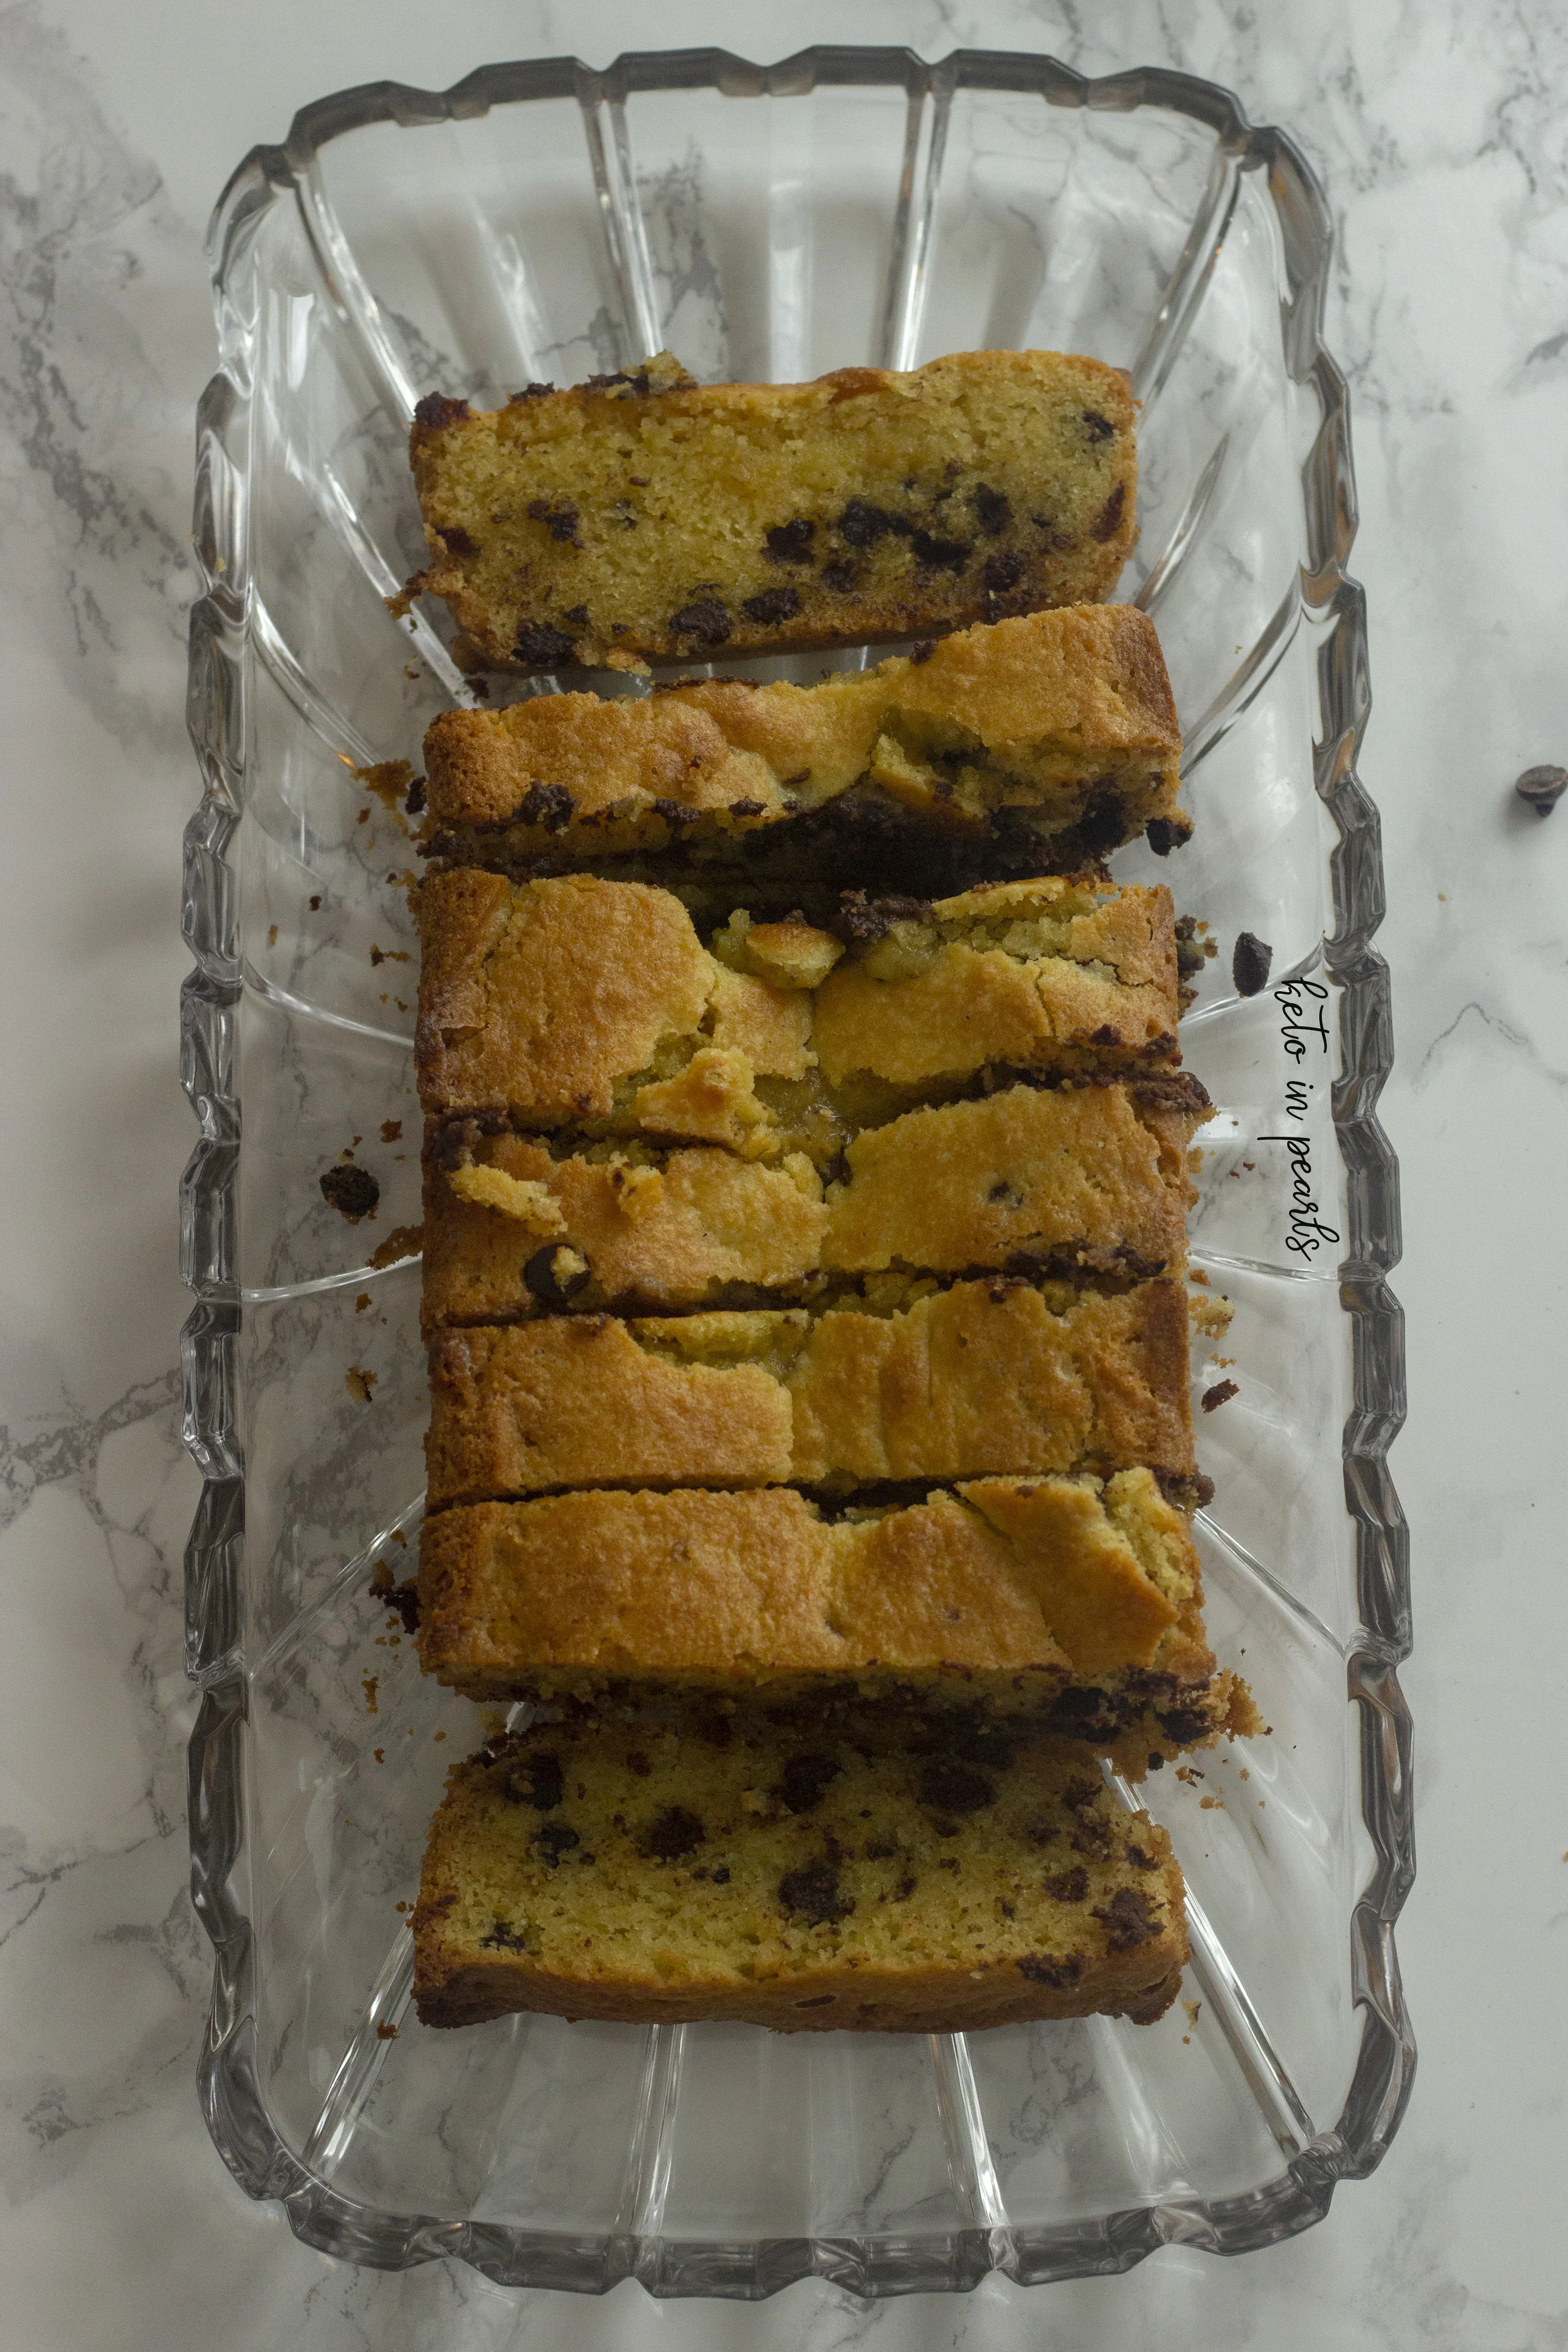 Keto banana bread with chocolate chips! Buttery, soft, and scrumptious. Only 4 net carbs for one big slice!